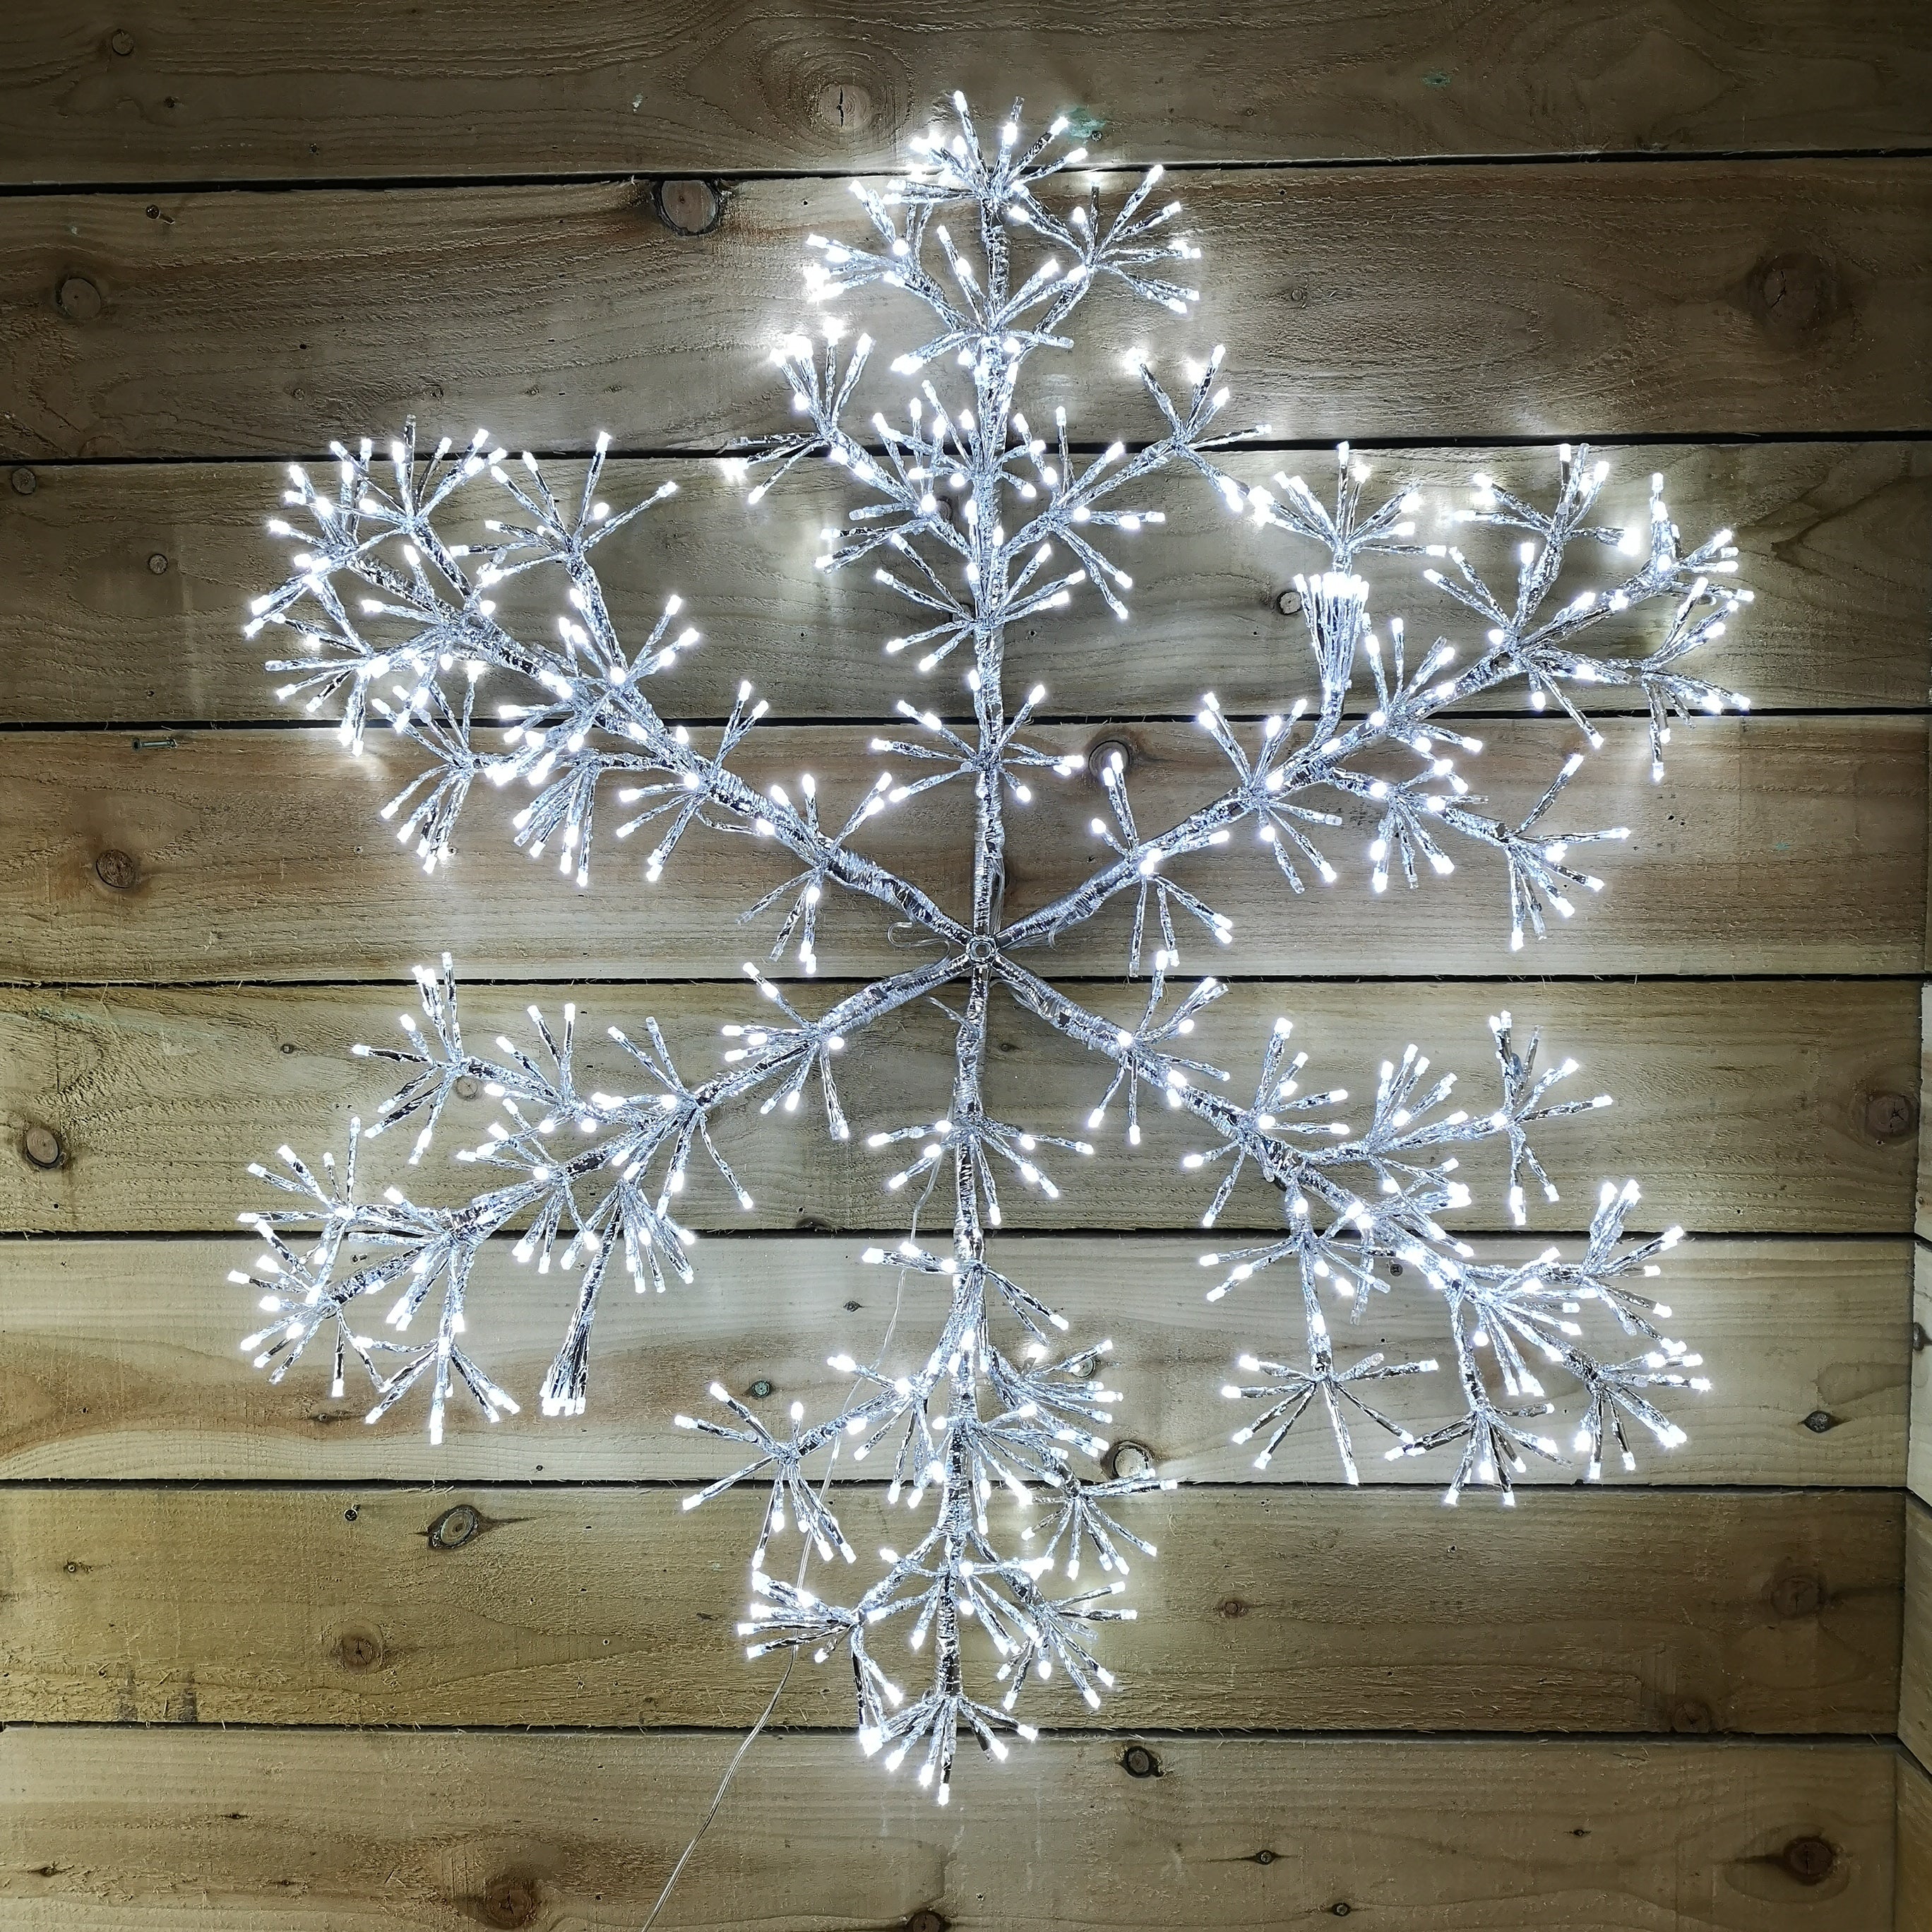 Premier 90cm Silver Starburst Snowflake Wall Window Decoration With 660 White LEDs